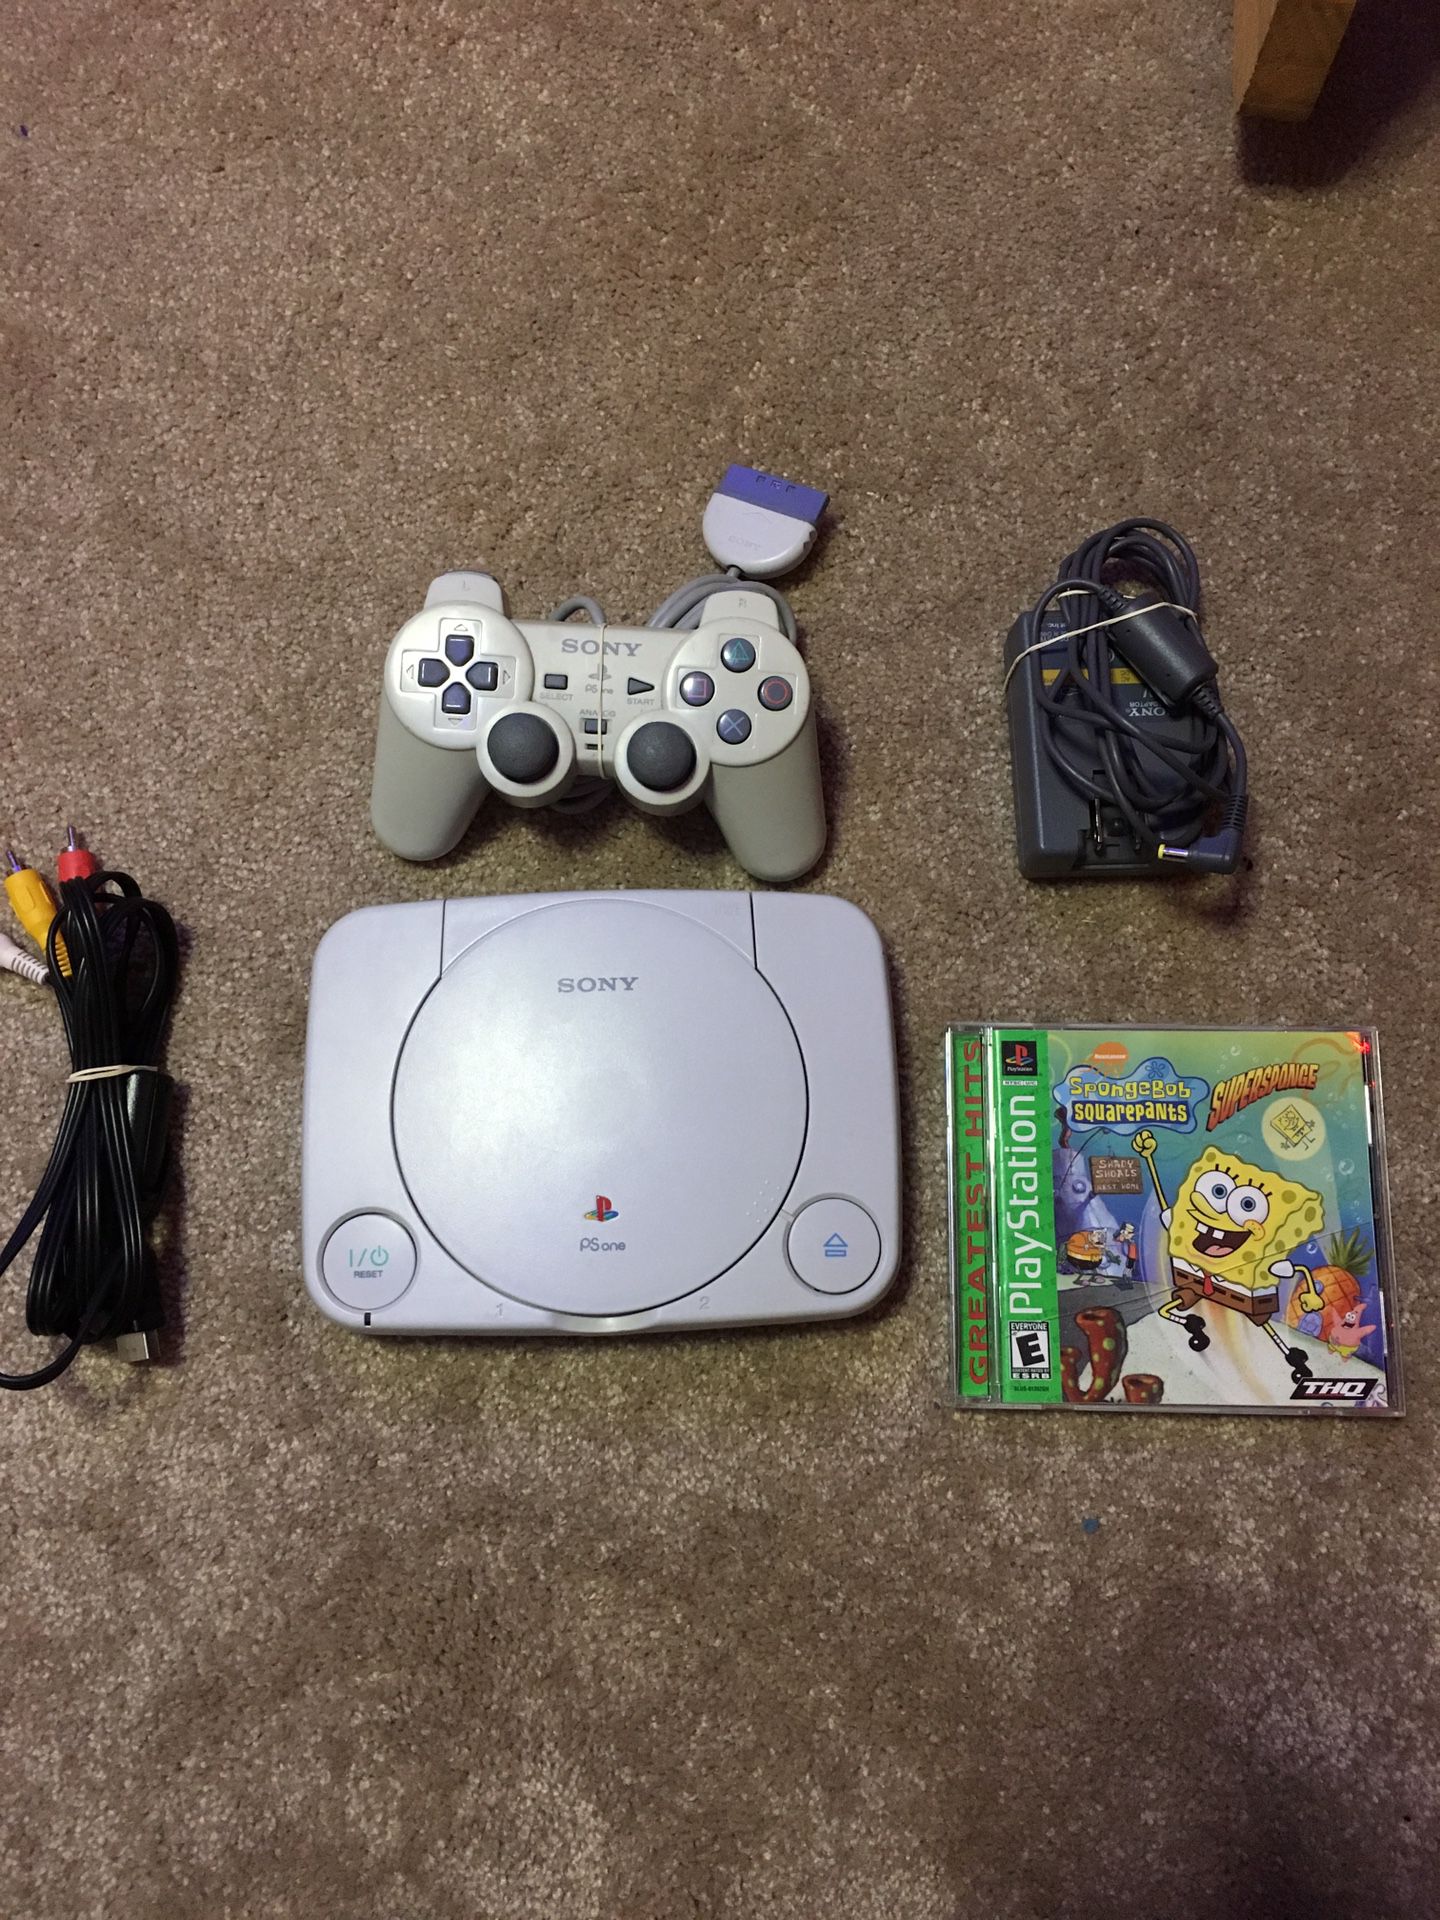 PS1 Mini Slim scph-101 w/ controller, game, and cords- Tested